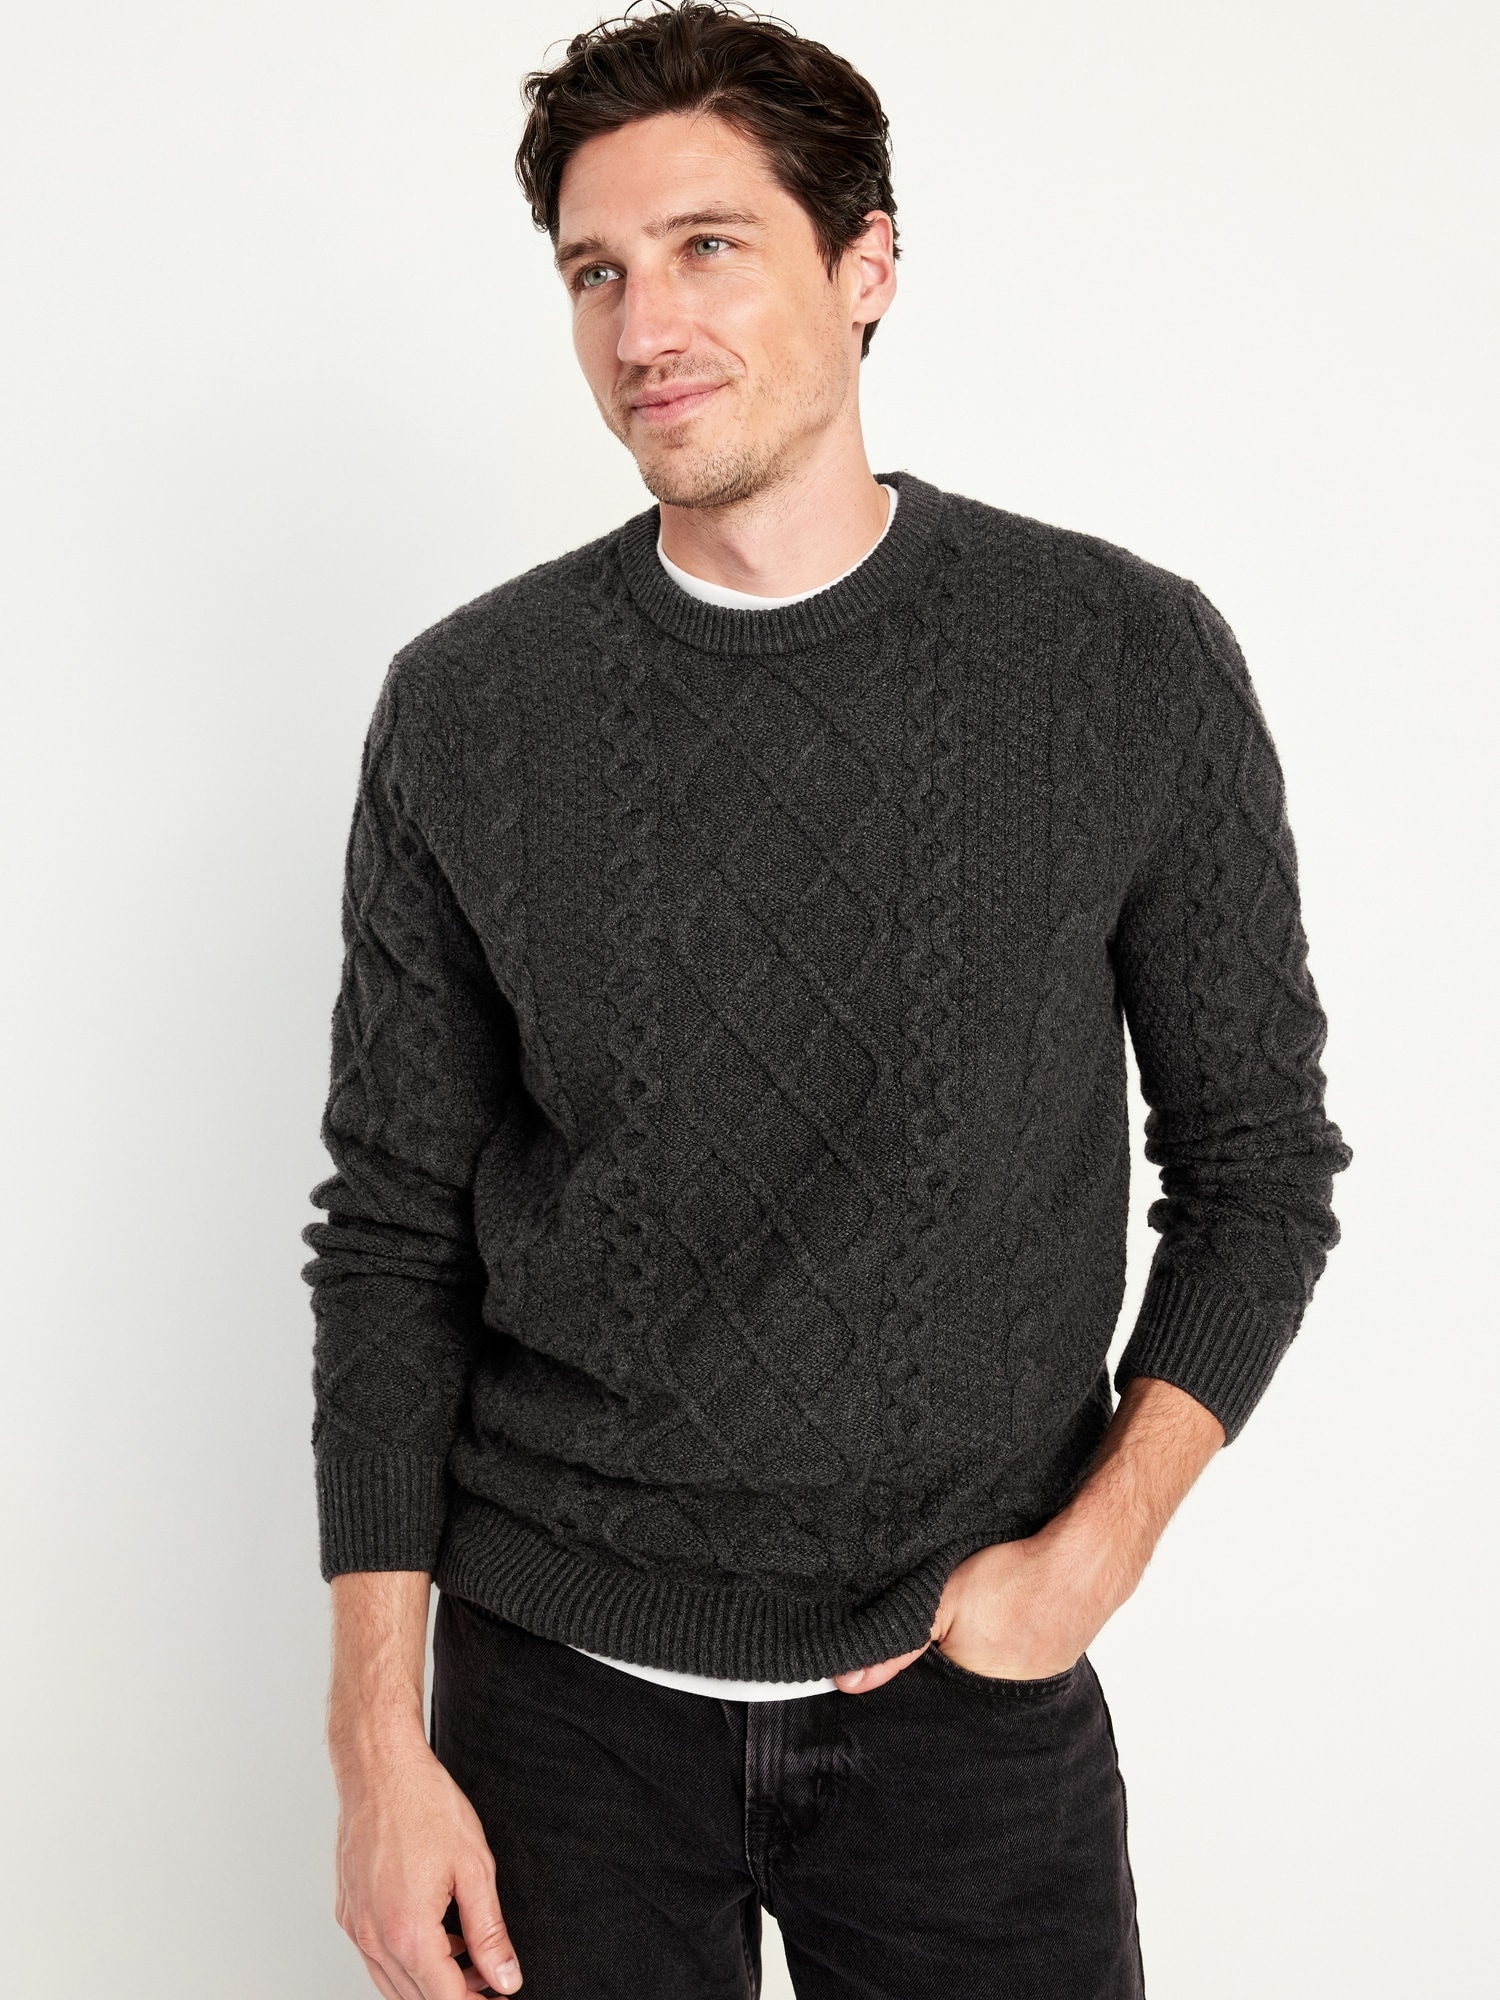 Mens Casual Striped Sweater $38.99  Men sweater, Mens outfits, Men casual